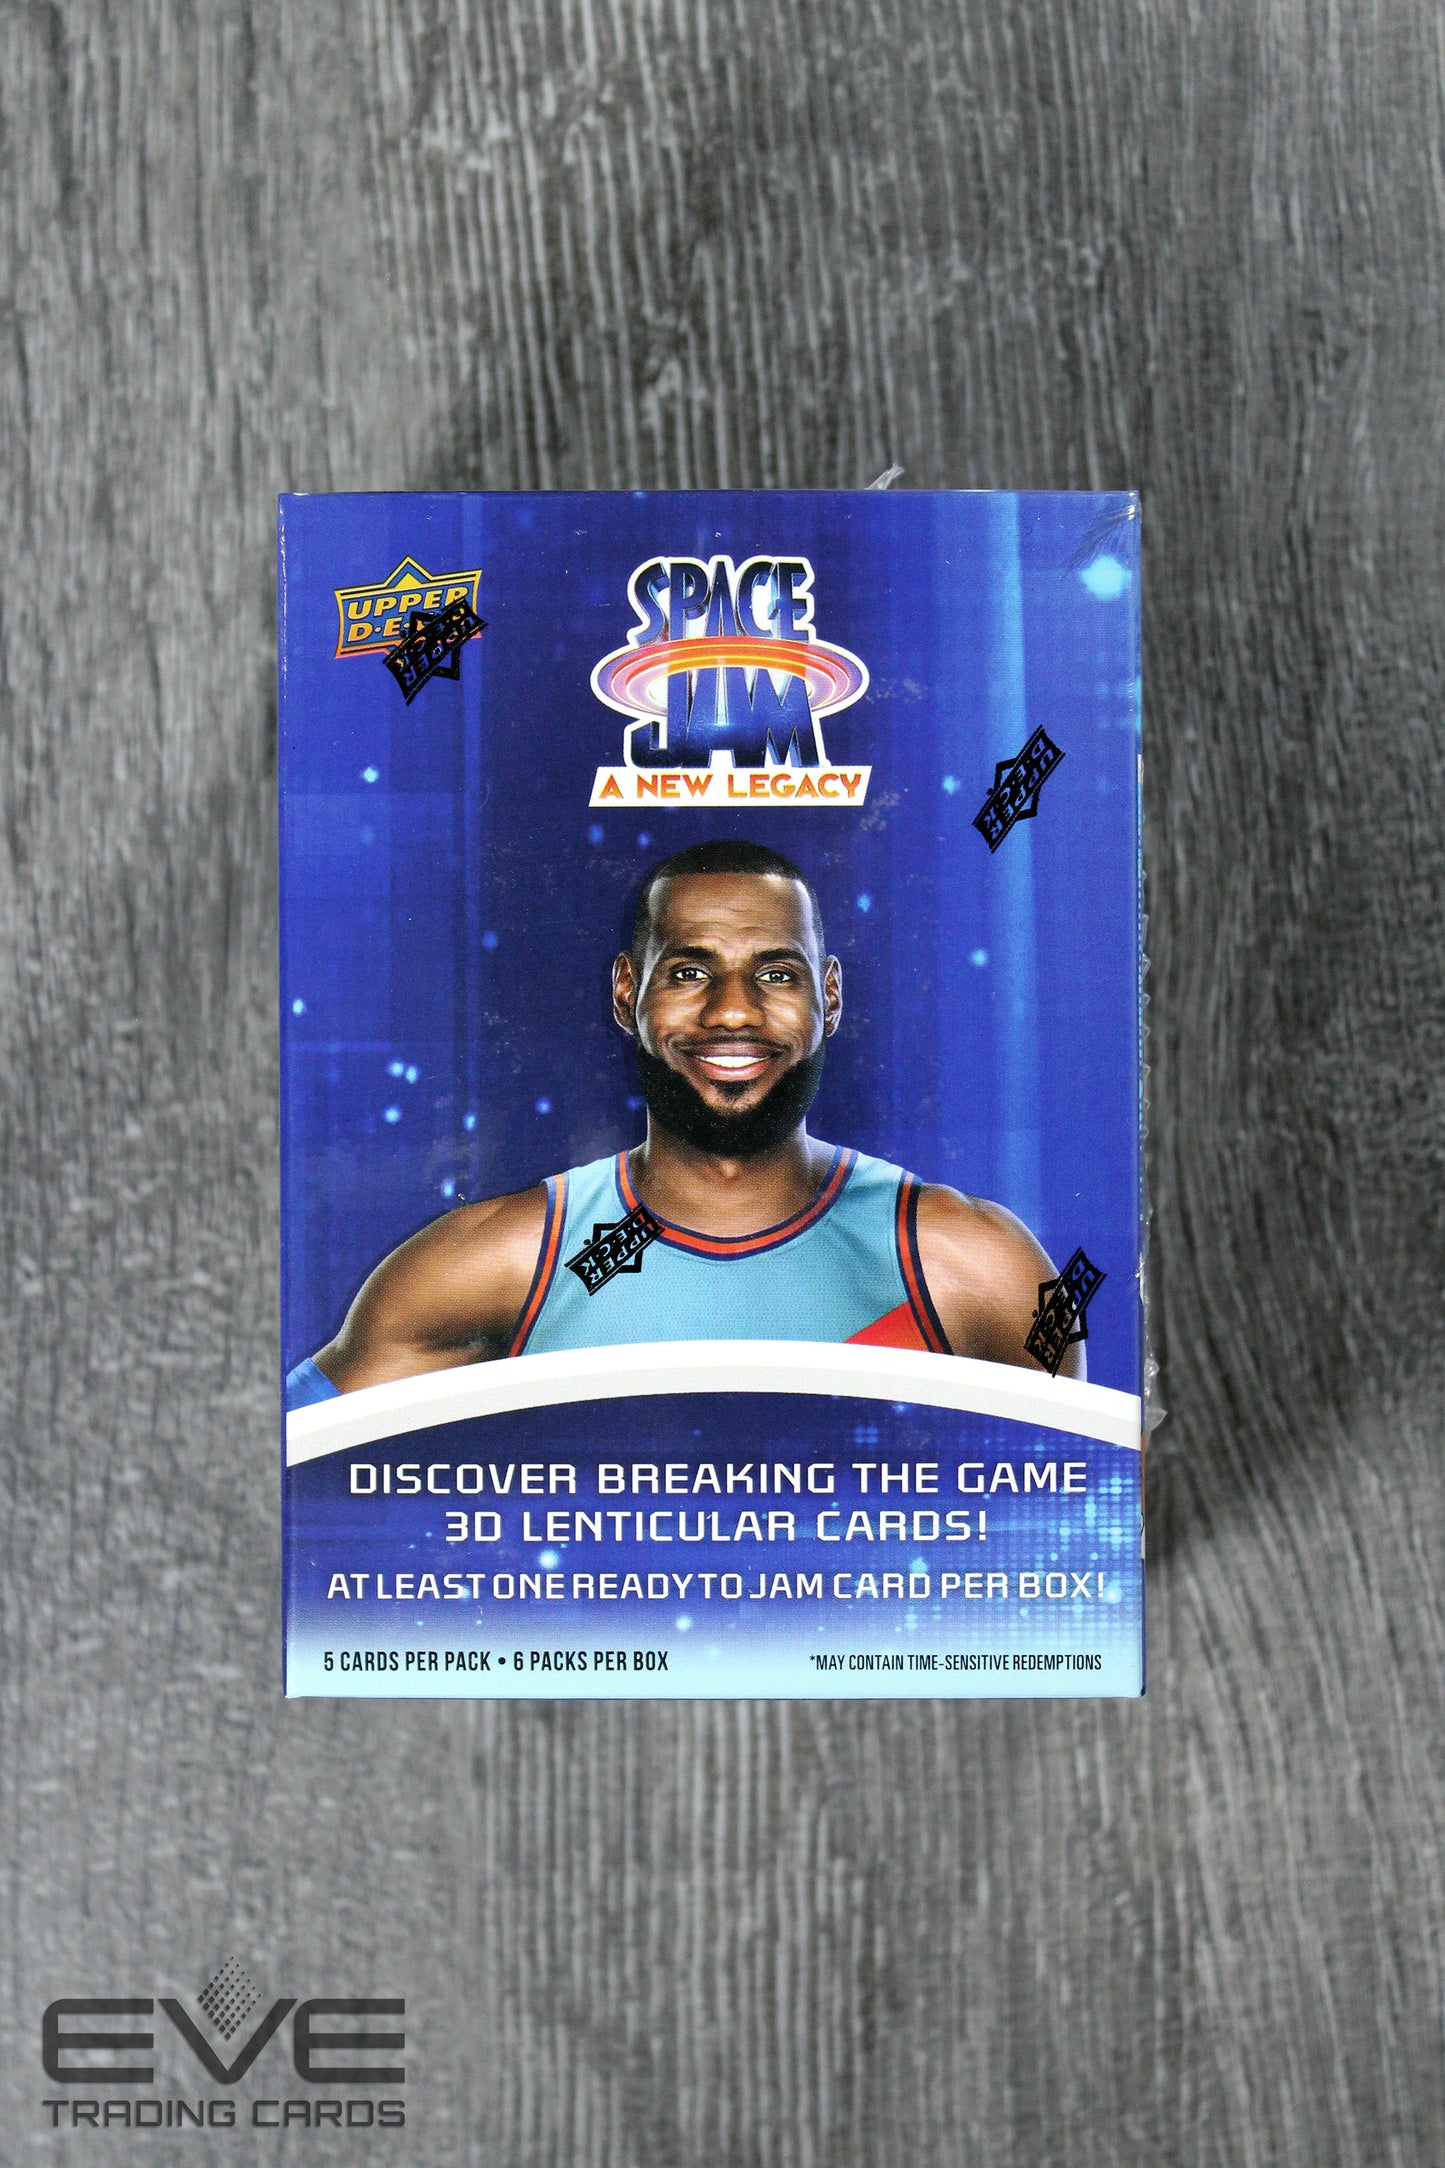 2021 Upper Deck Space Jam: A New Legacy Trading Cards 6-Pack Blaster Box